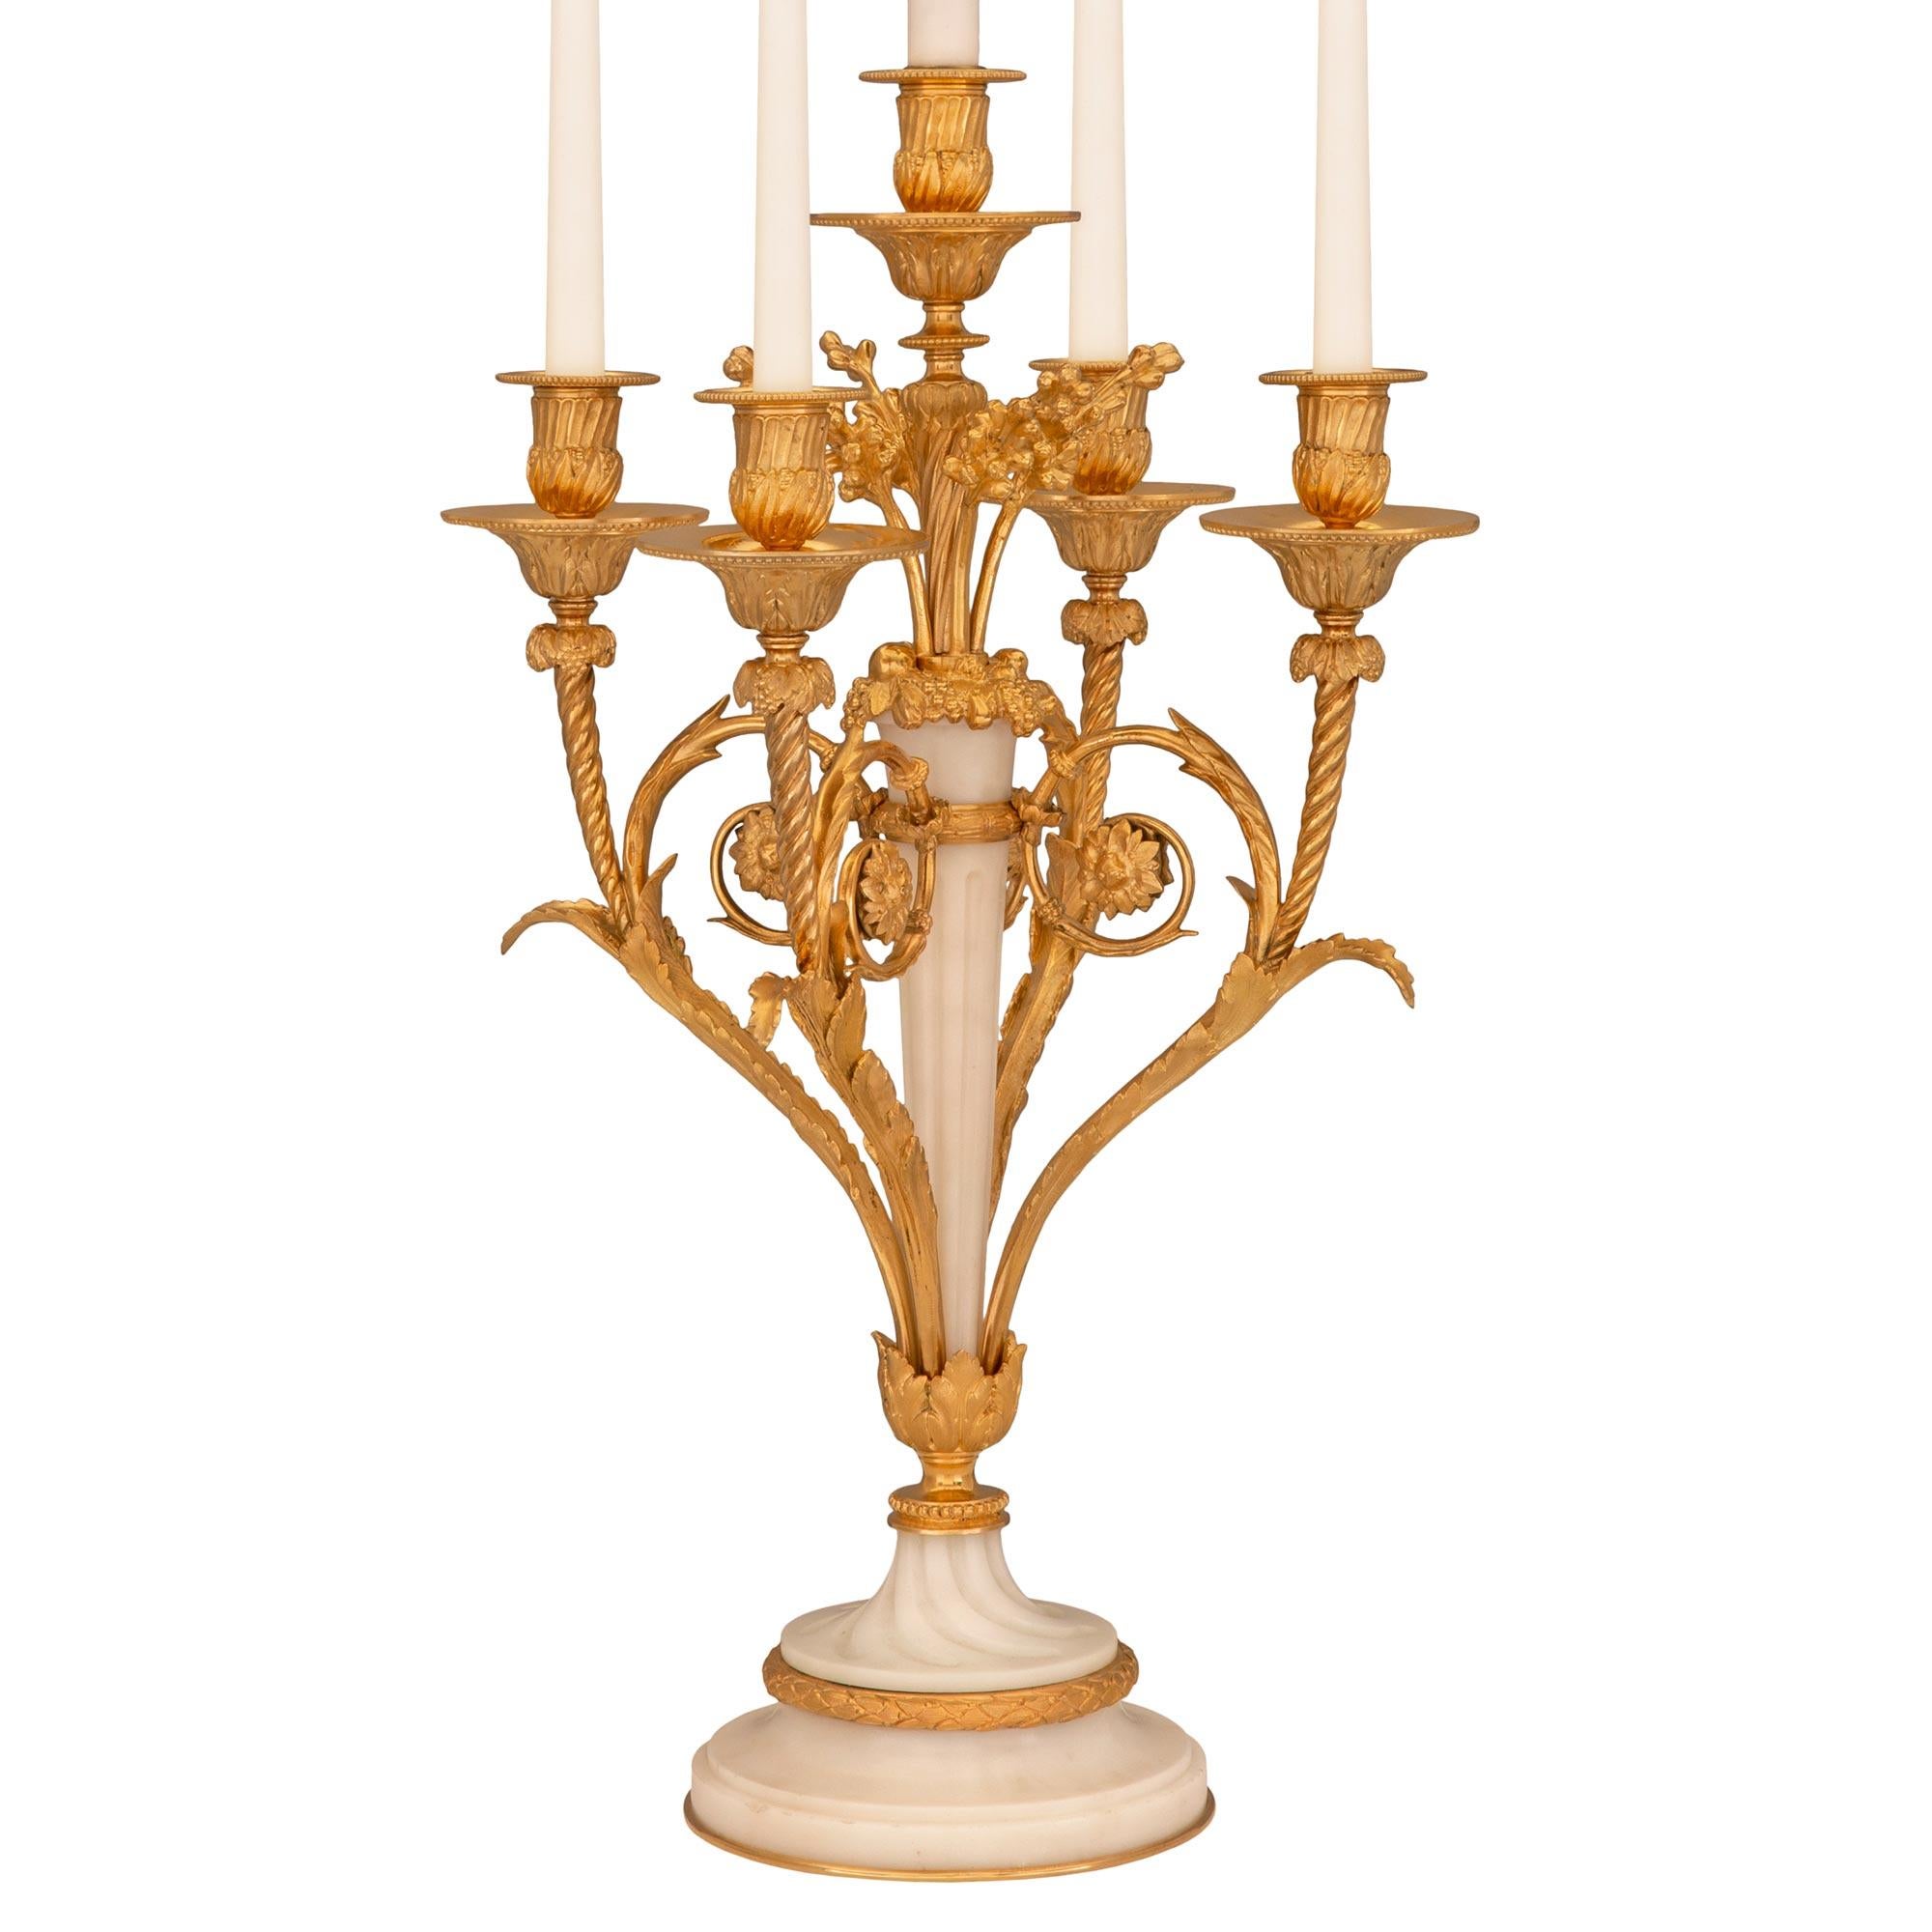 French 19th Century Louis XVI St. Belle Époque Period Candelabra Lamps In Good Condition For Sale In West Palm Beach, FL